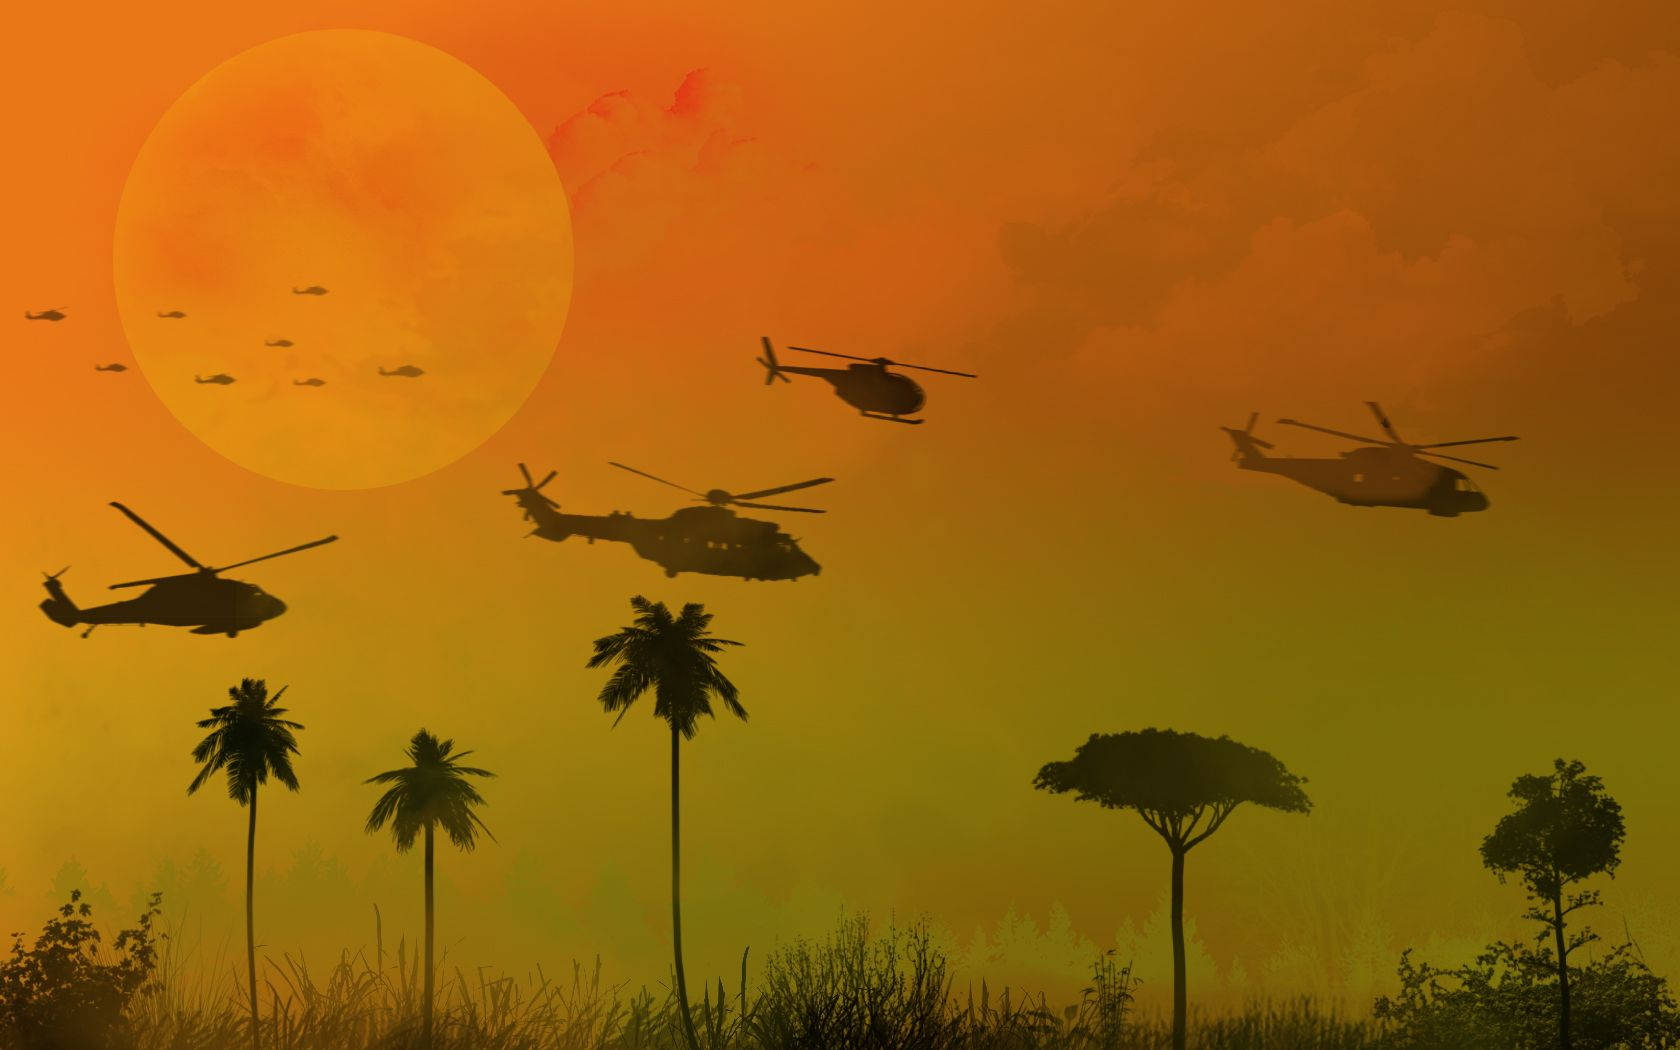 Apocalypse Now Heavy Duty Helicopters Wallpaper